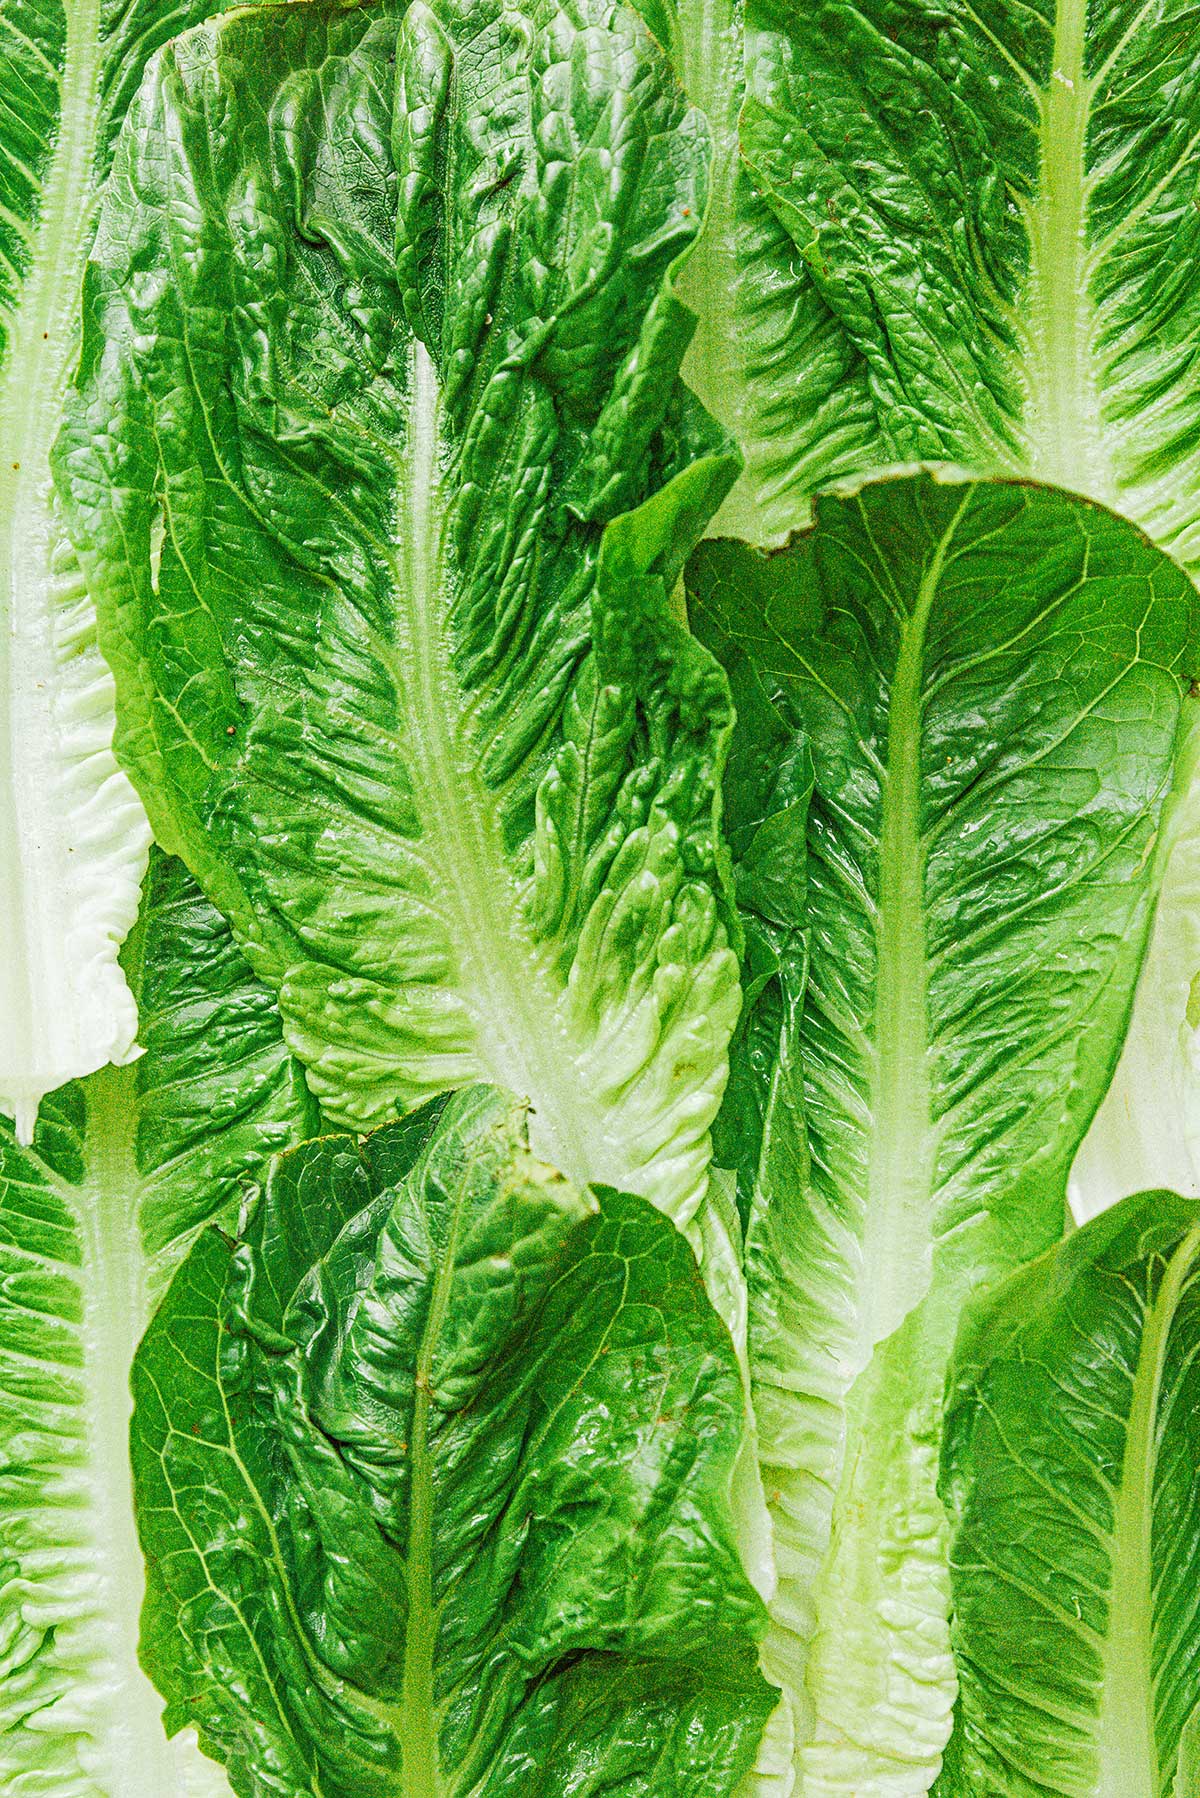 A up-close view detailing the texture of whole romaine leaves